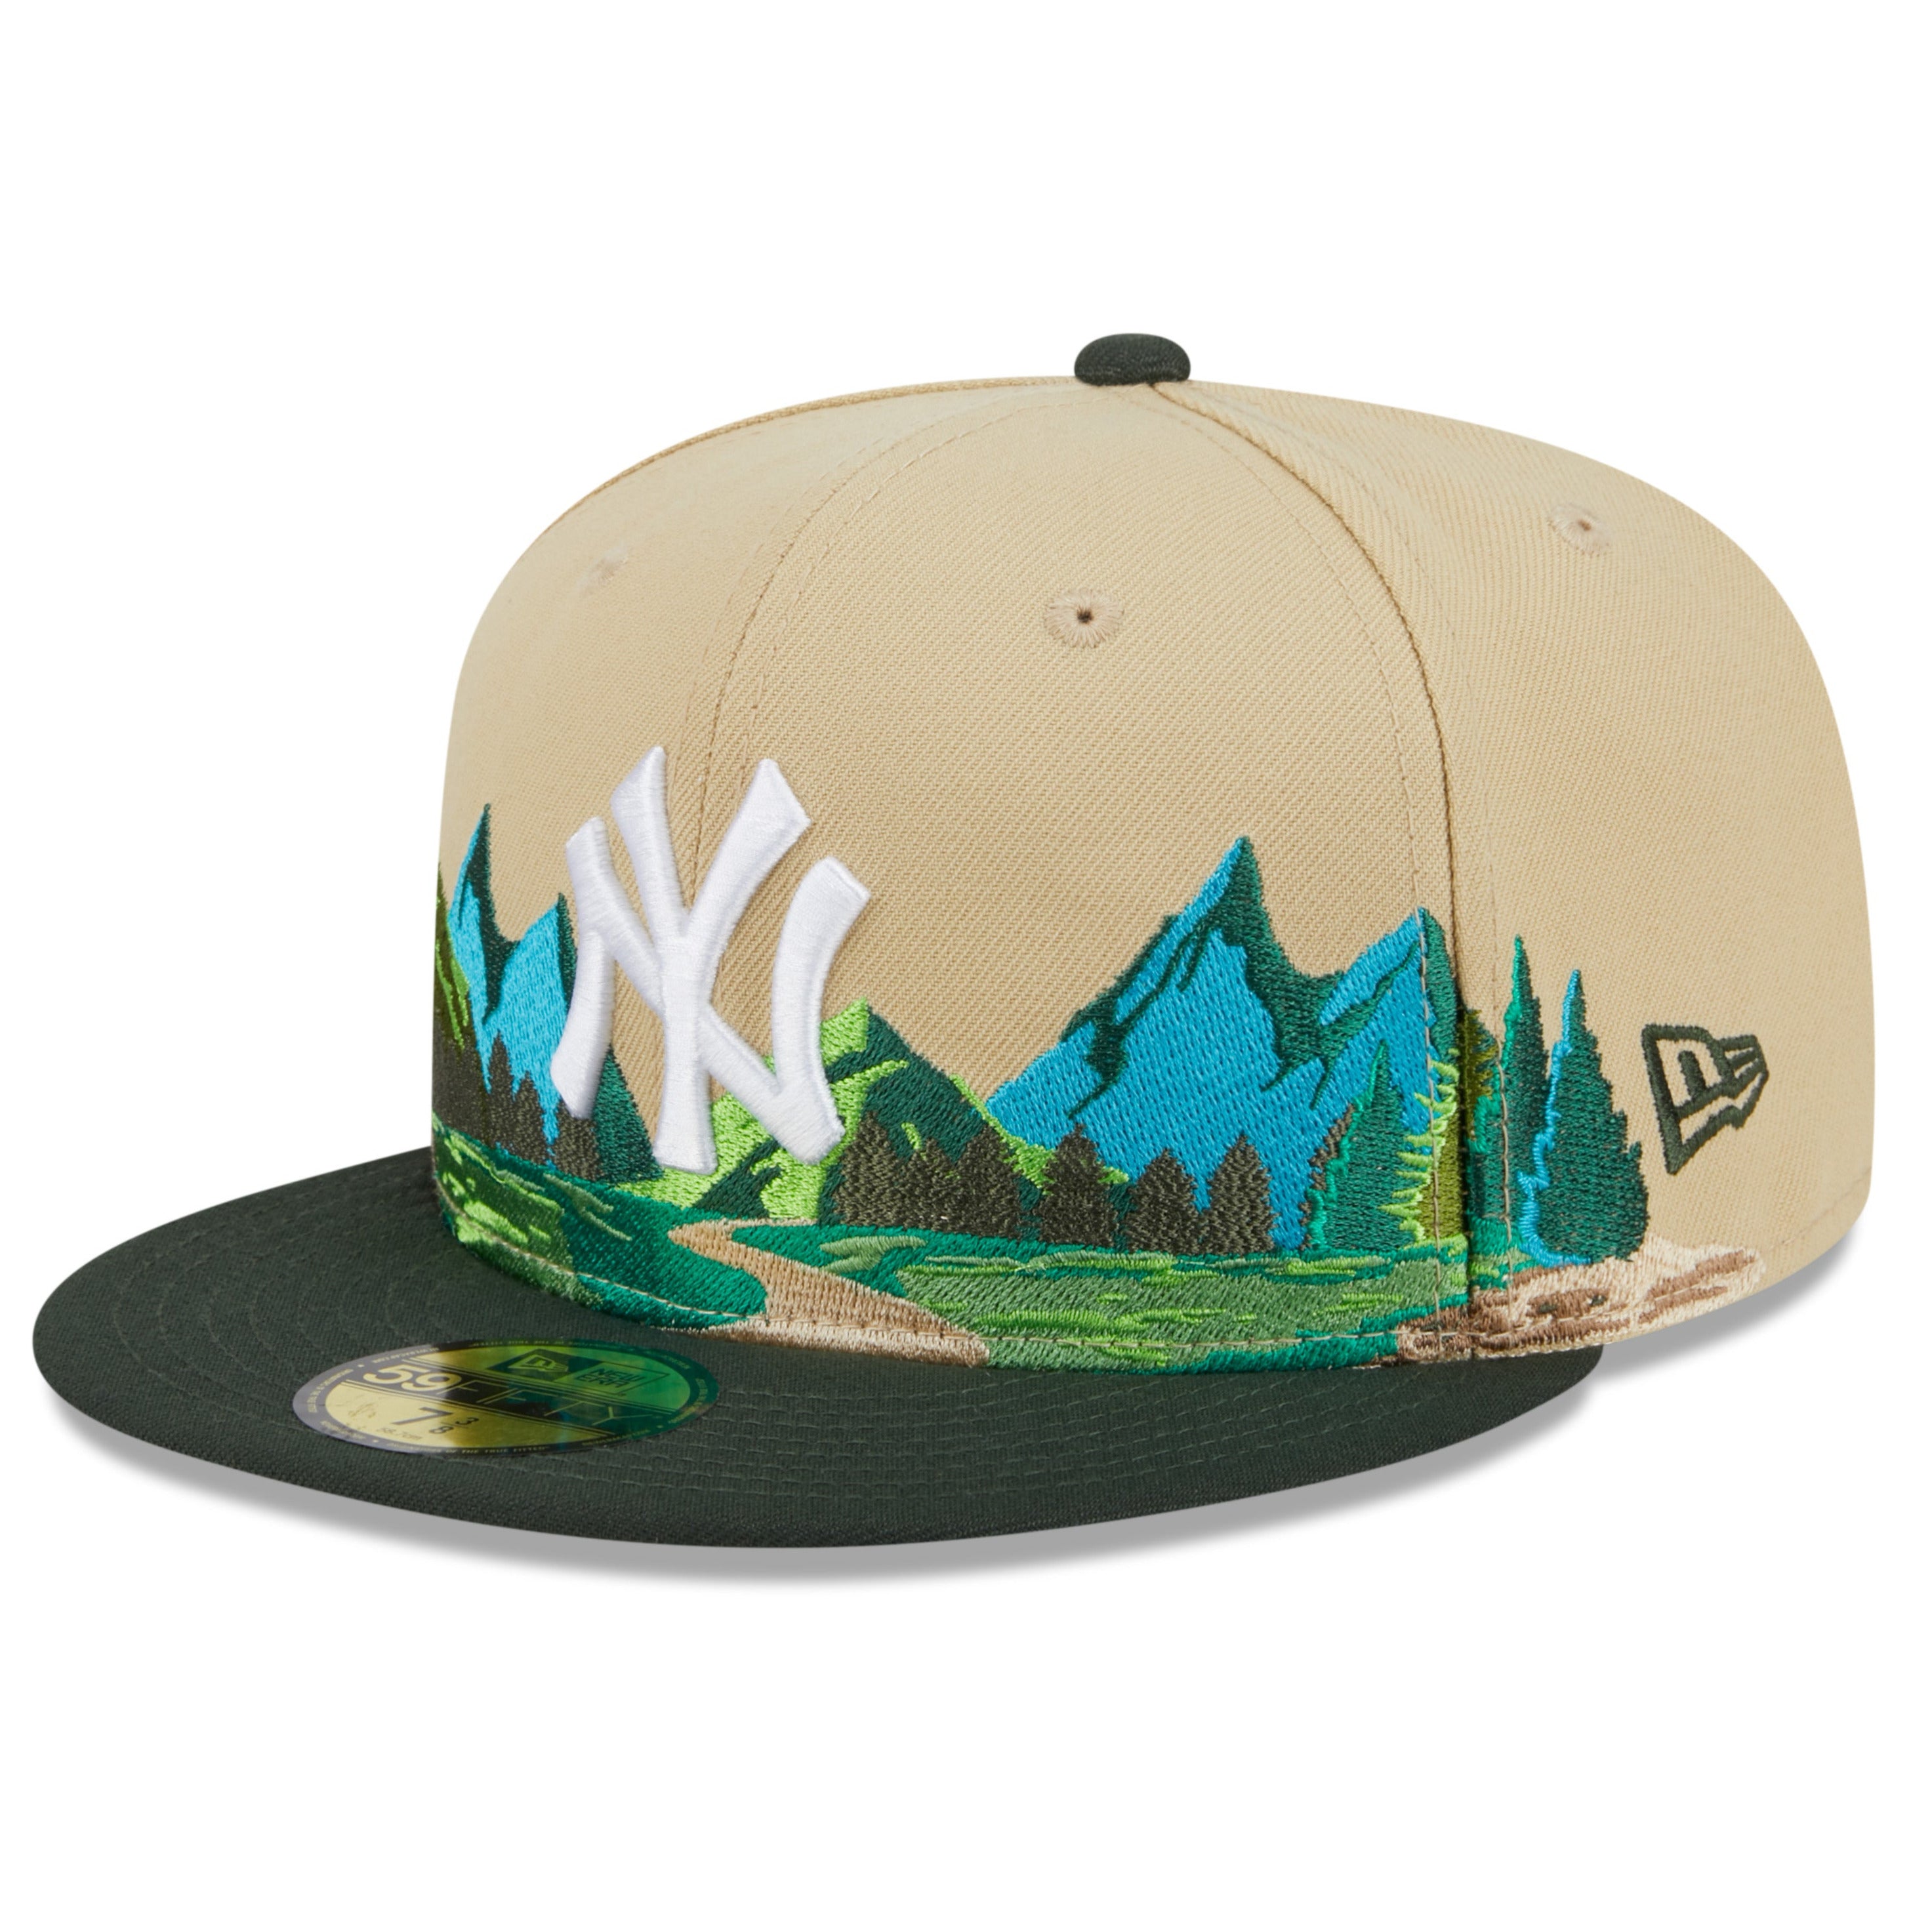 NEW ERA 59FIFTY MLB NEW YORK YANKEES TEAM LANDSCAPE TWO TONE / GREY UV FITTED CAP